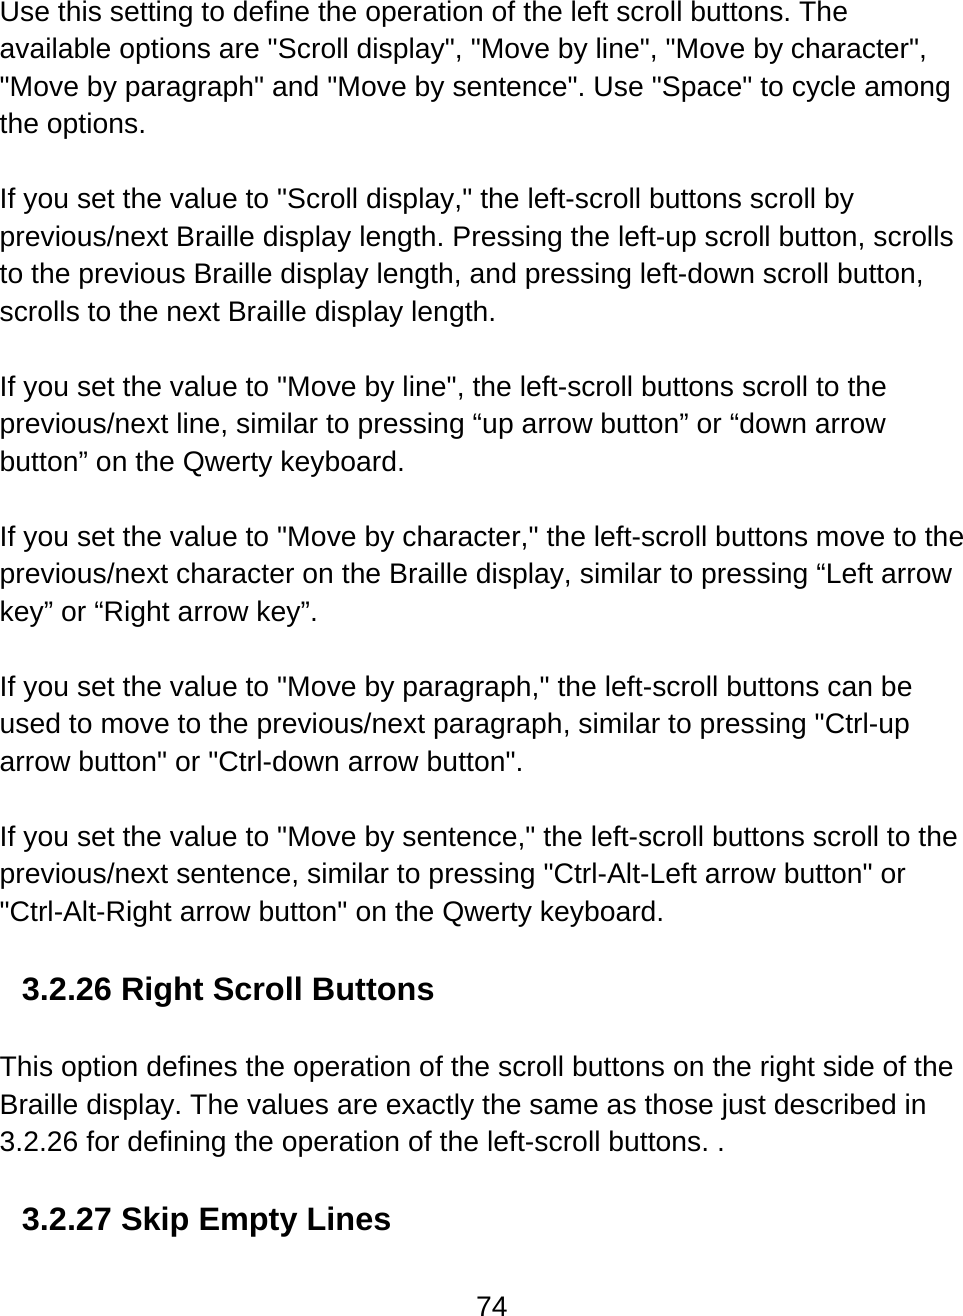 74  Use this setting to define the operation of the left scroll buttons. The available options are &quot;Scroll display&quot;, &quot;Move by line&quot;, &quot;Move by character&quot;, &quot;Move by paragraph&quot; and &quot;Move by sentence&quot;. Use &quot;Space&quot; to cycle among the options.    If you set the value to &quot;Scroll display,&quot; the left-scroll buttons scroll by previous/next Braille display length. Pressing the left-up scroll button, scrolls to the previous Braille display length, and pressing left-down scroll button, scrolls to the next Braille display length.  If you set the value to &quot;Move by line&quot;, the left-scroll buttons scroll to the previous/next line, similar to pressing “up arrow button” or “down arrow button” on the Qwerty keyboard.   If you set the value to &quot;Move by character,&quot; the left-scroll buttons move to the previous/next character on the Braille display, similar to pressing “Left arrow key” or “Right arrow key”.  If you set the value to &quot;Move by paragraph,&quot; the left-scroll buttons can be used to move to the previous/next paragraph, similar to pressing &quot;Ctrl-up arrow button&quot; or &quot;Ctrl-down arrow button&quot;.   If you set the value to &quot;Move by sentence,&quot; the left-scroll buttons scroll to the previous/next sentence, similar to pressing &quot;Ctrl-Alt-Left arrow button&quot; or &quot;Ctrl-Alt-Right arrow button&quot; on the Qwerty keyboard.  3.2.26 Right Scroll Buttons  This option defines the operation of the scroll buttons on the right side of the Braille display. The values are exactly the same as those just described in 3.2.26 for defining the operation of the left-scroll buttons. .    3.2.27 Skip Empty Lines  